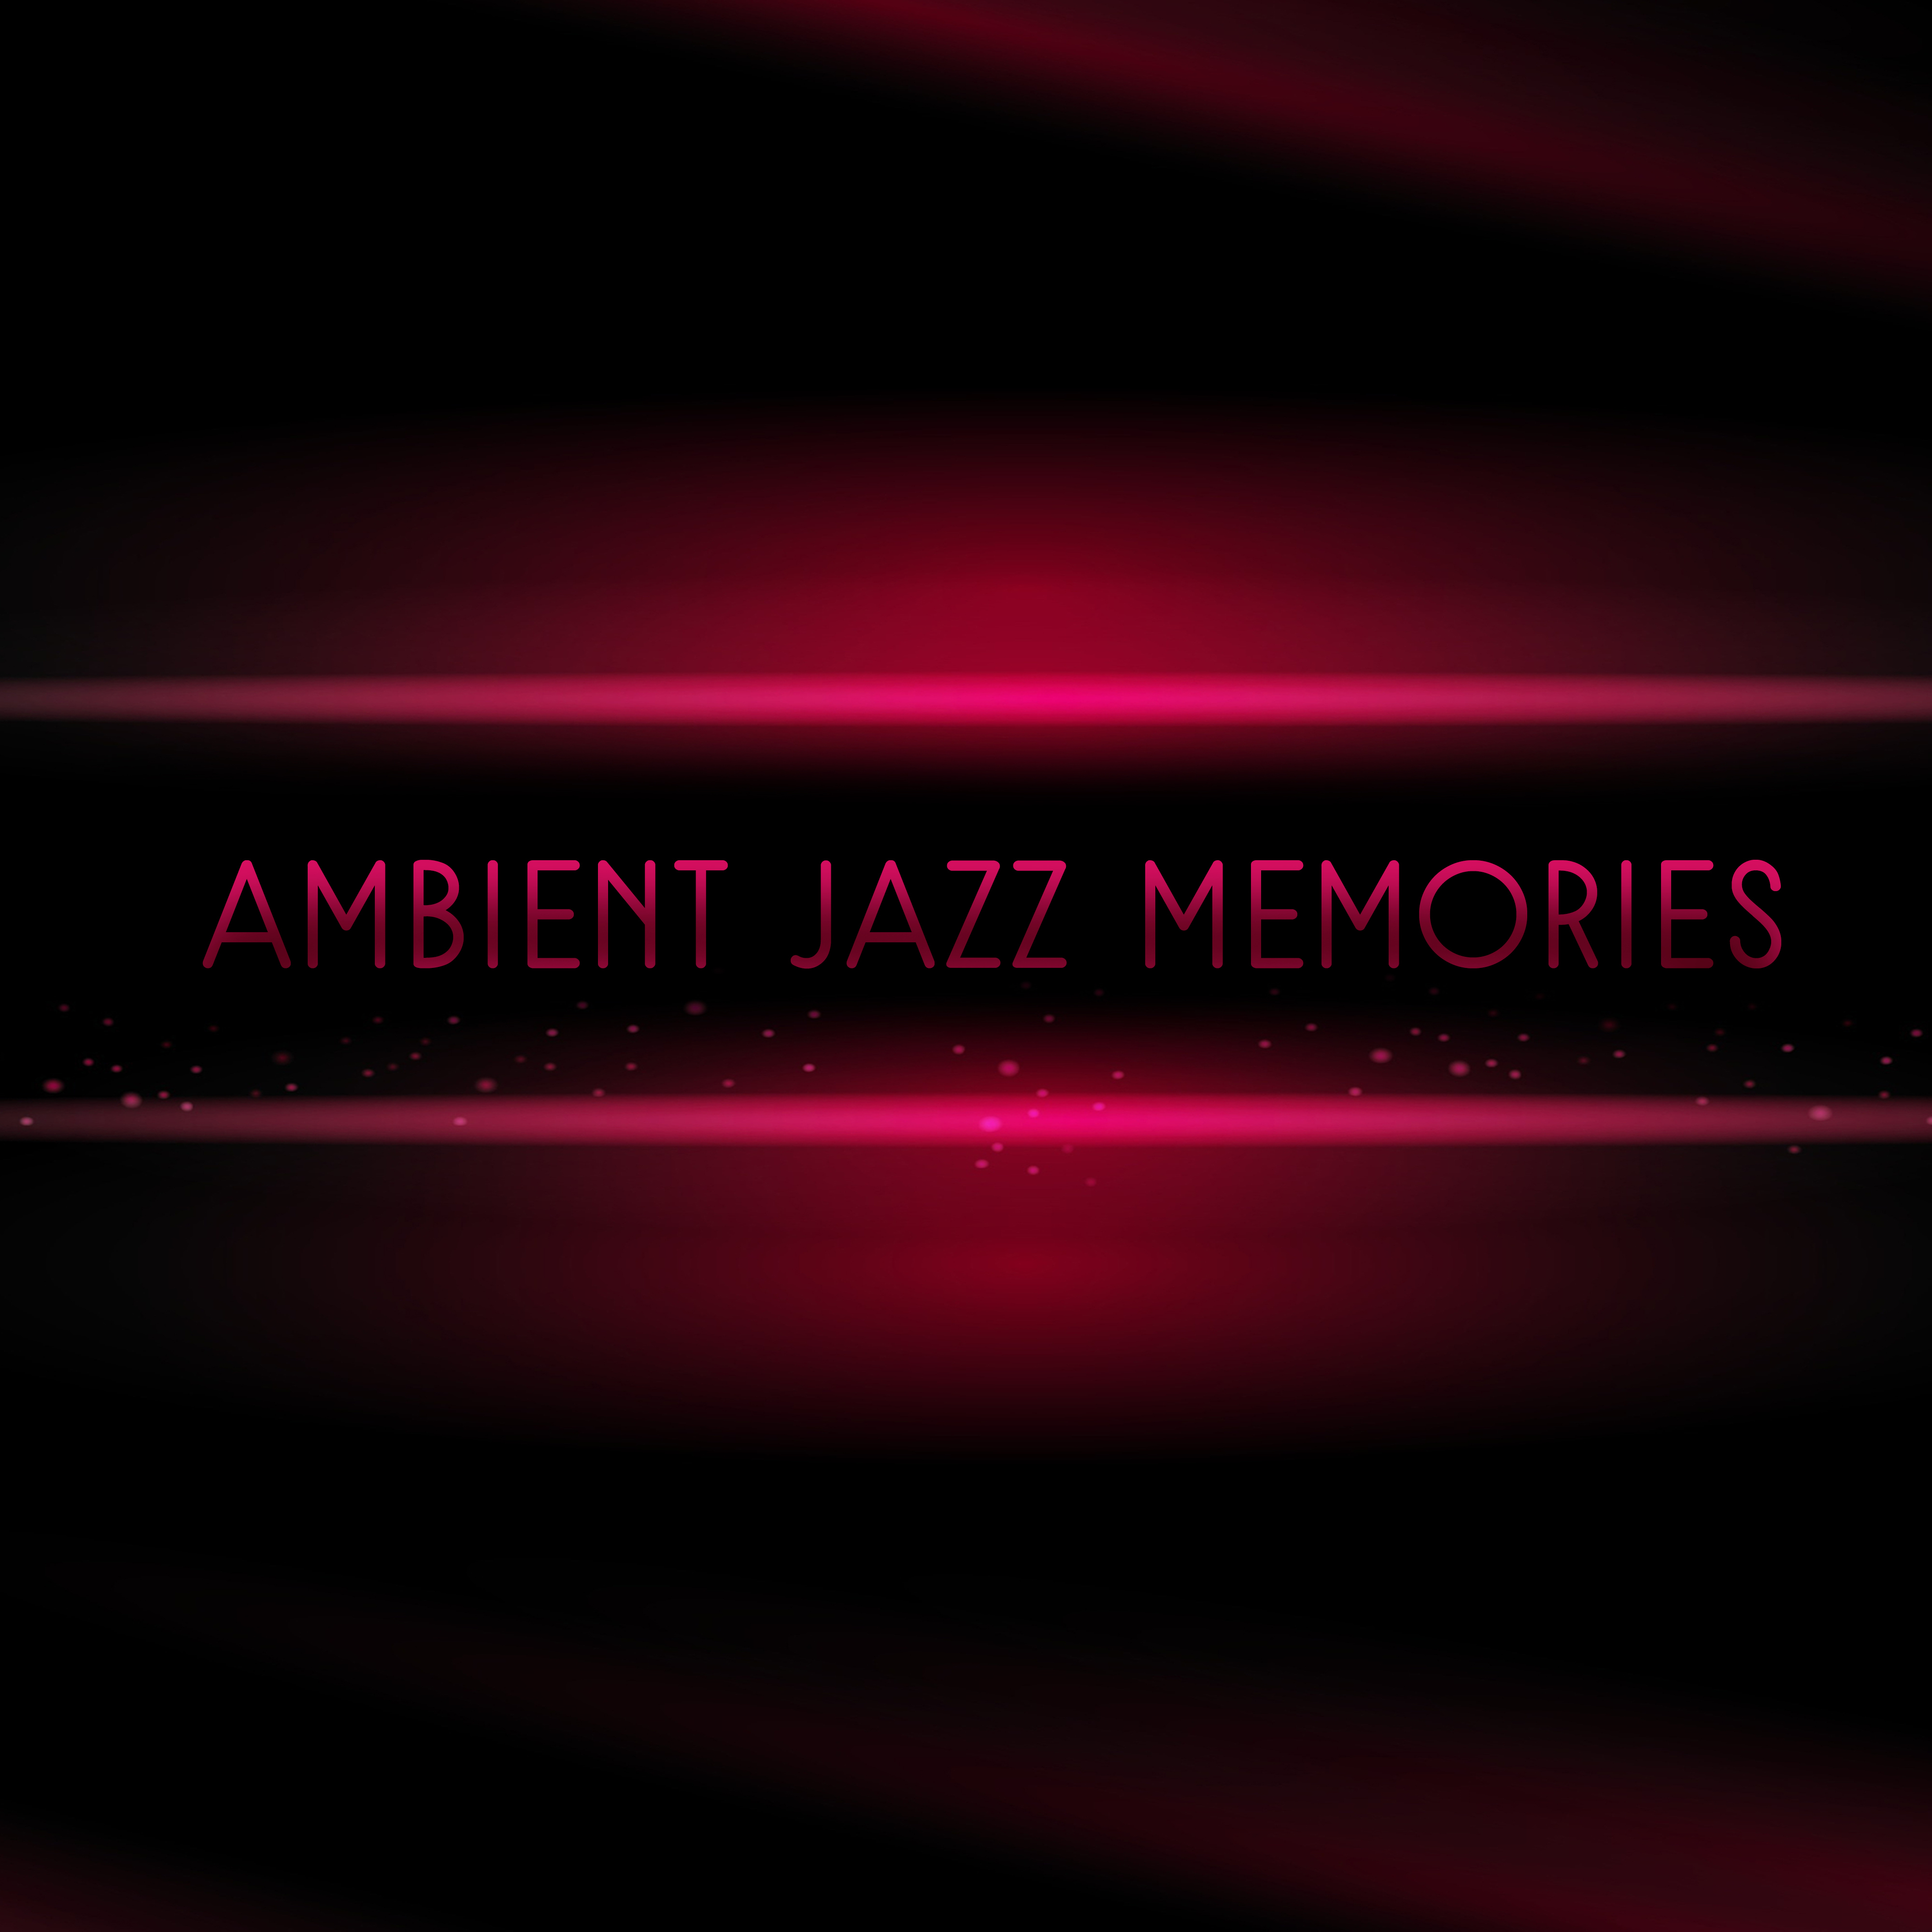 Ambient Jazz Memories  Evening Relaxation Sounds, Stress Relief, Peaceful Piano, Calming Melodies